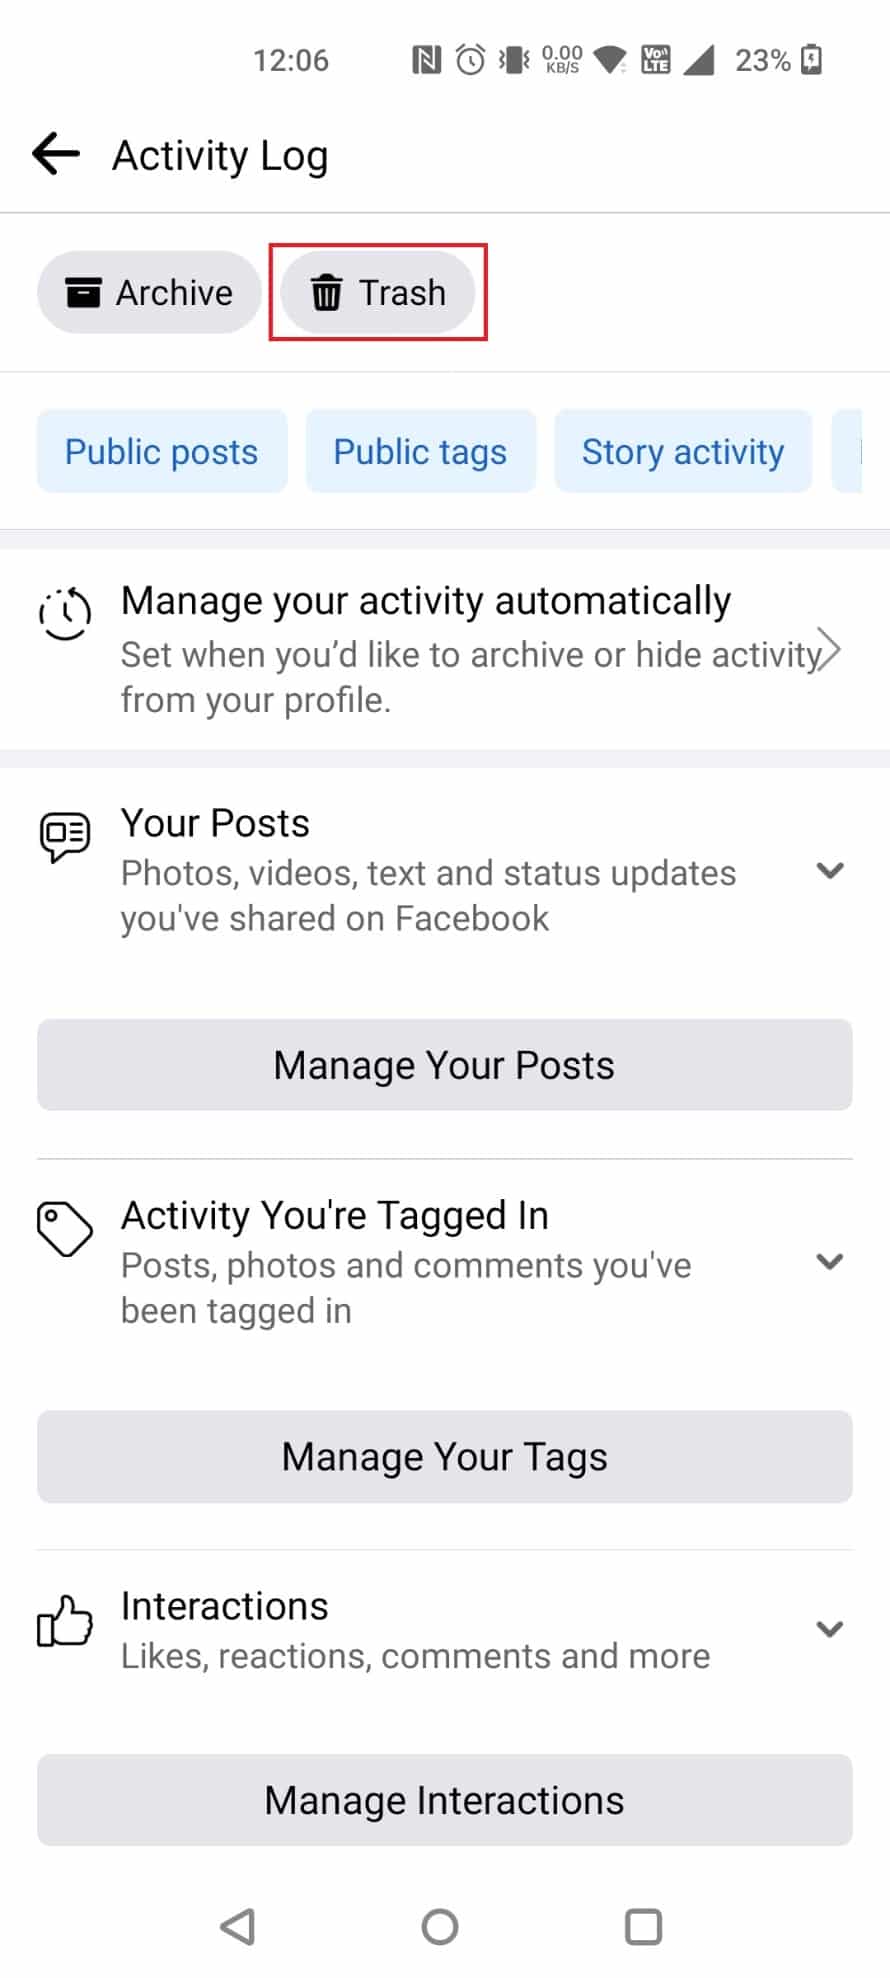 Tap on Trash to find all your deleted posts from the past 30 days | retrieve deleted Activity Log on Facebook